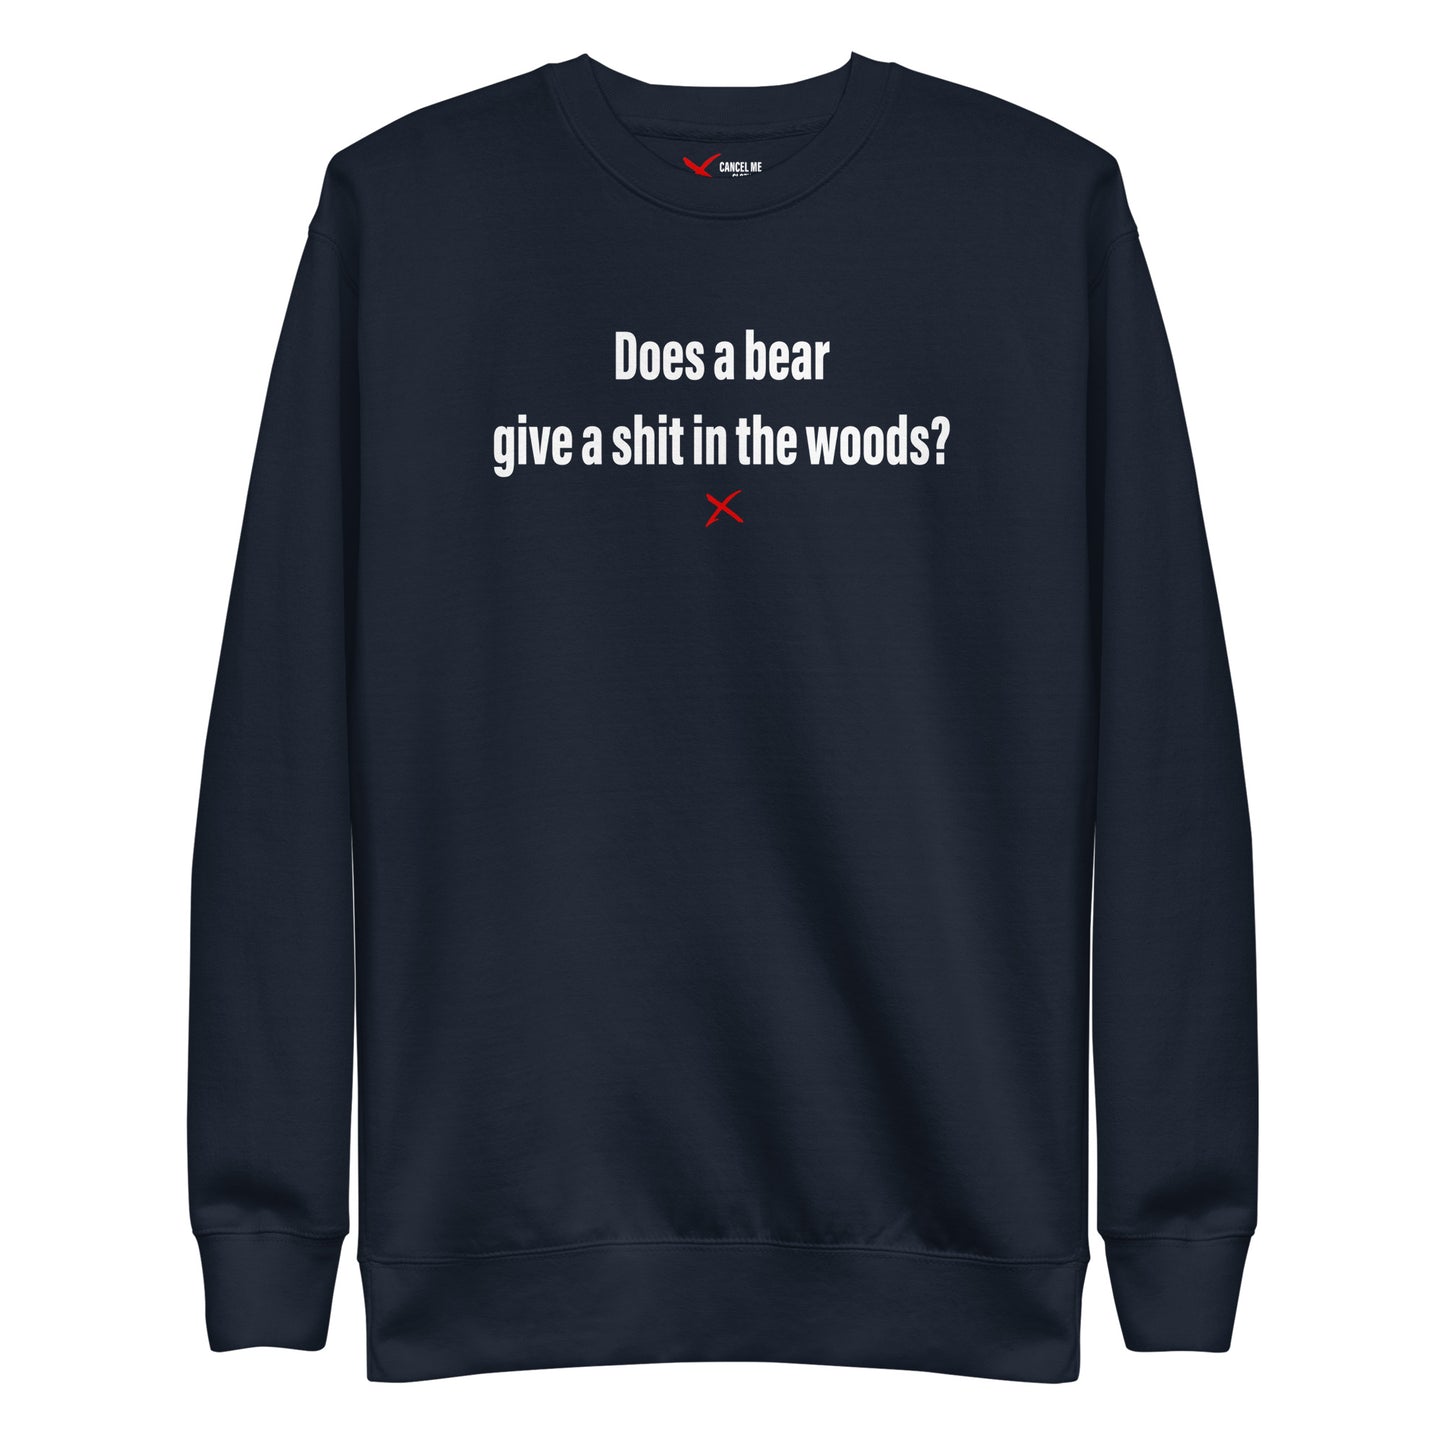 Does a bear give a shit in the woods? - Sweatshirt